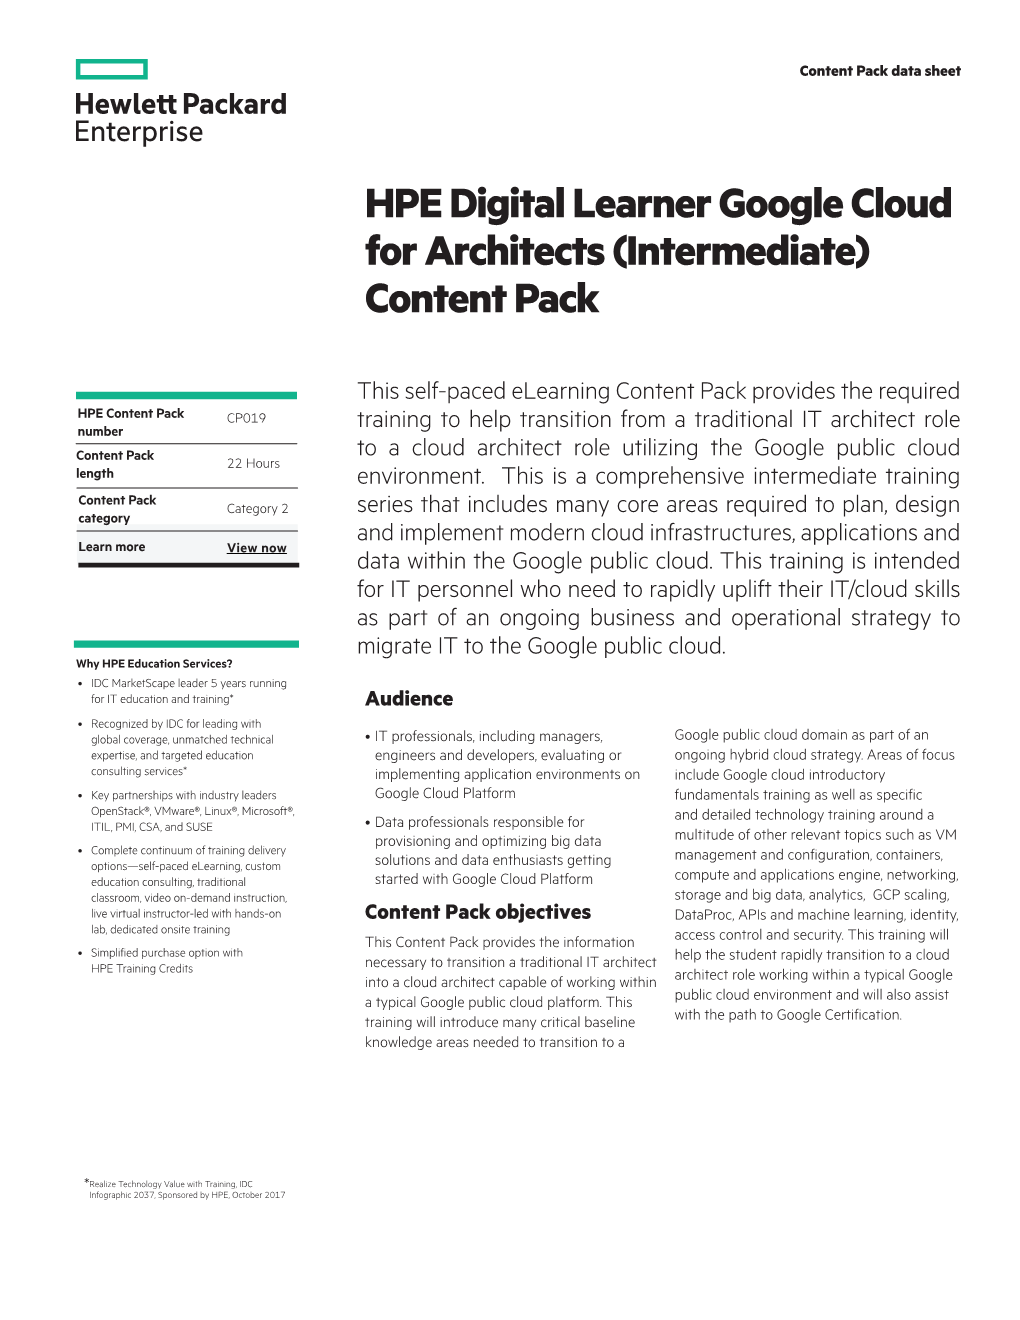 HPE Digital Learner Google Cloud for Architects (Intermediate) Content Pack